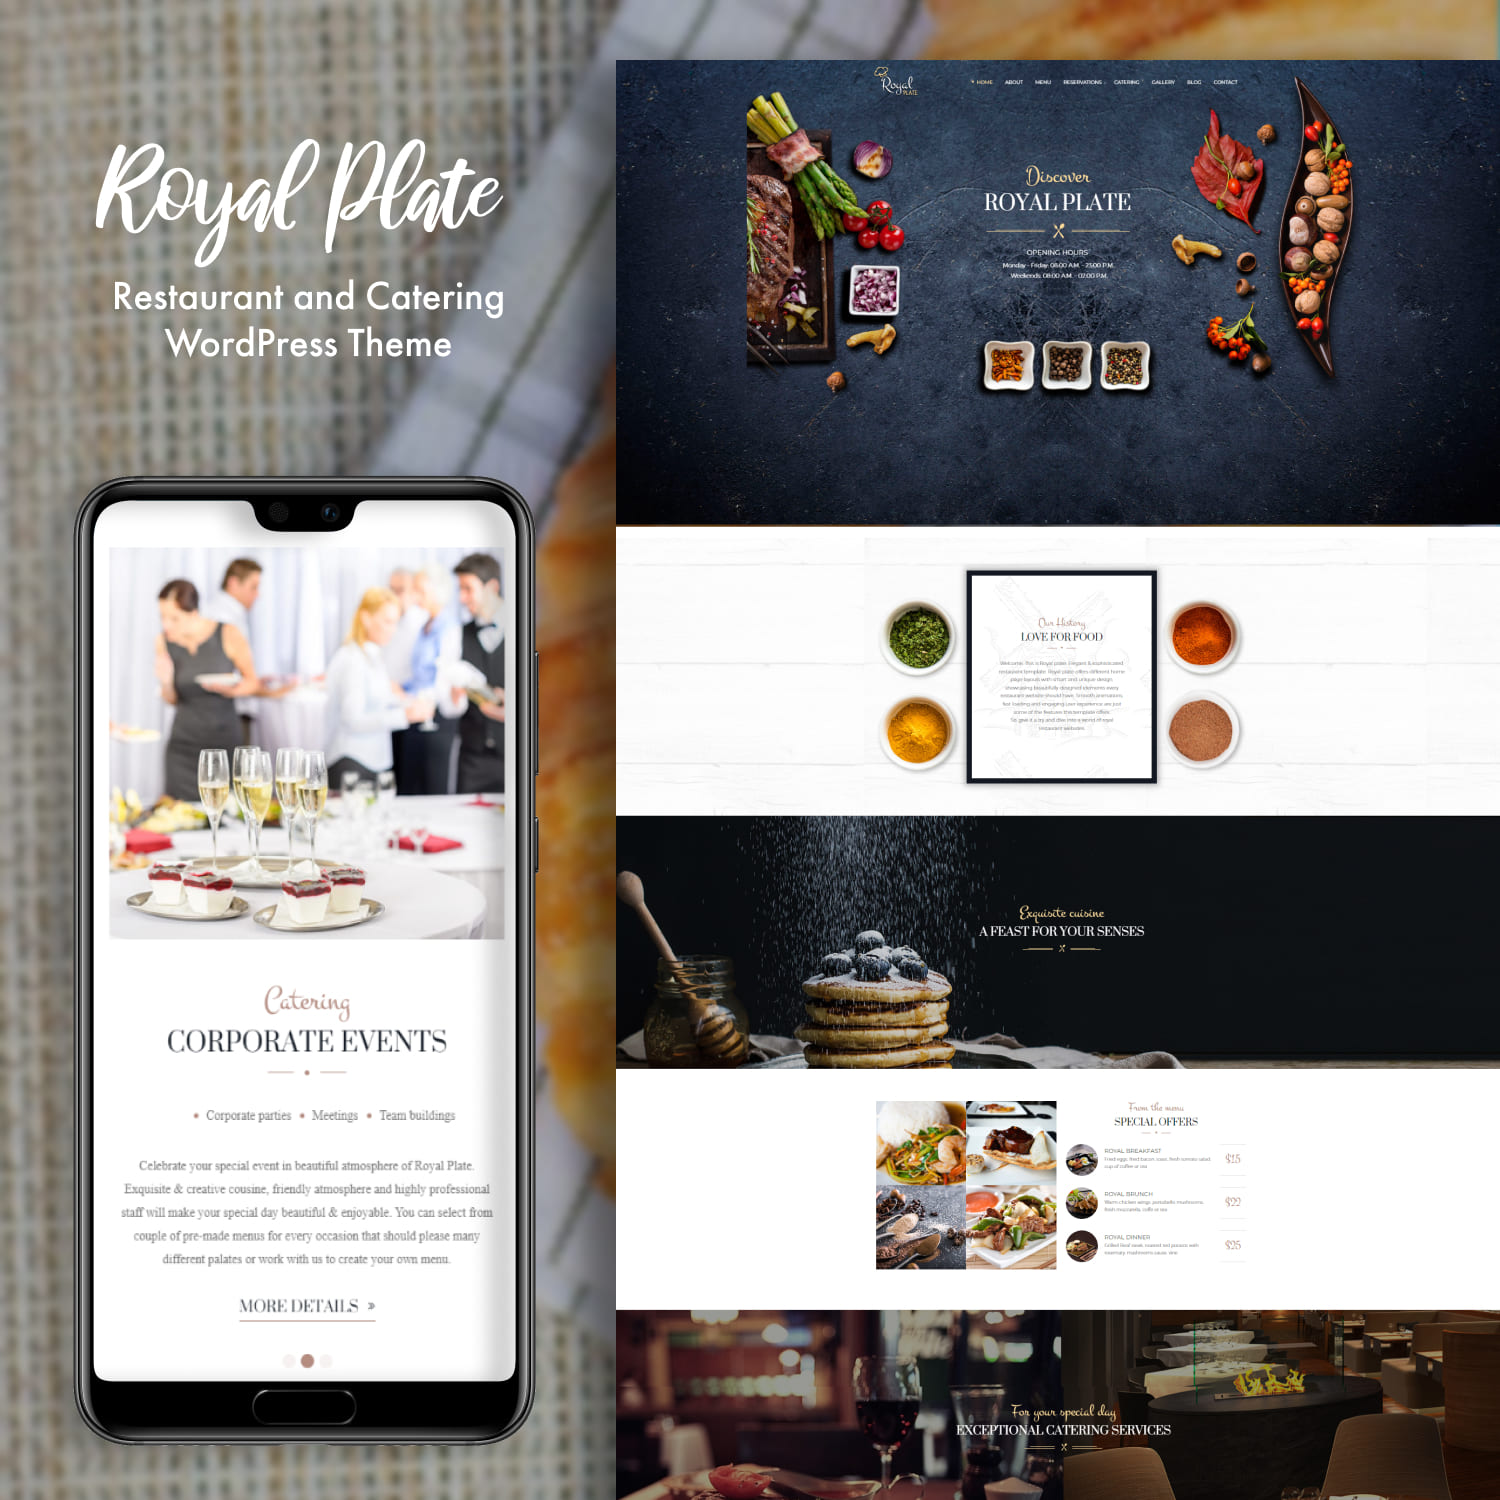 Royal Plate - Restaurant and Catering WordPress Theme.